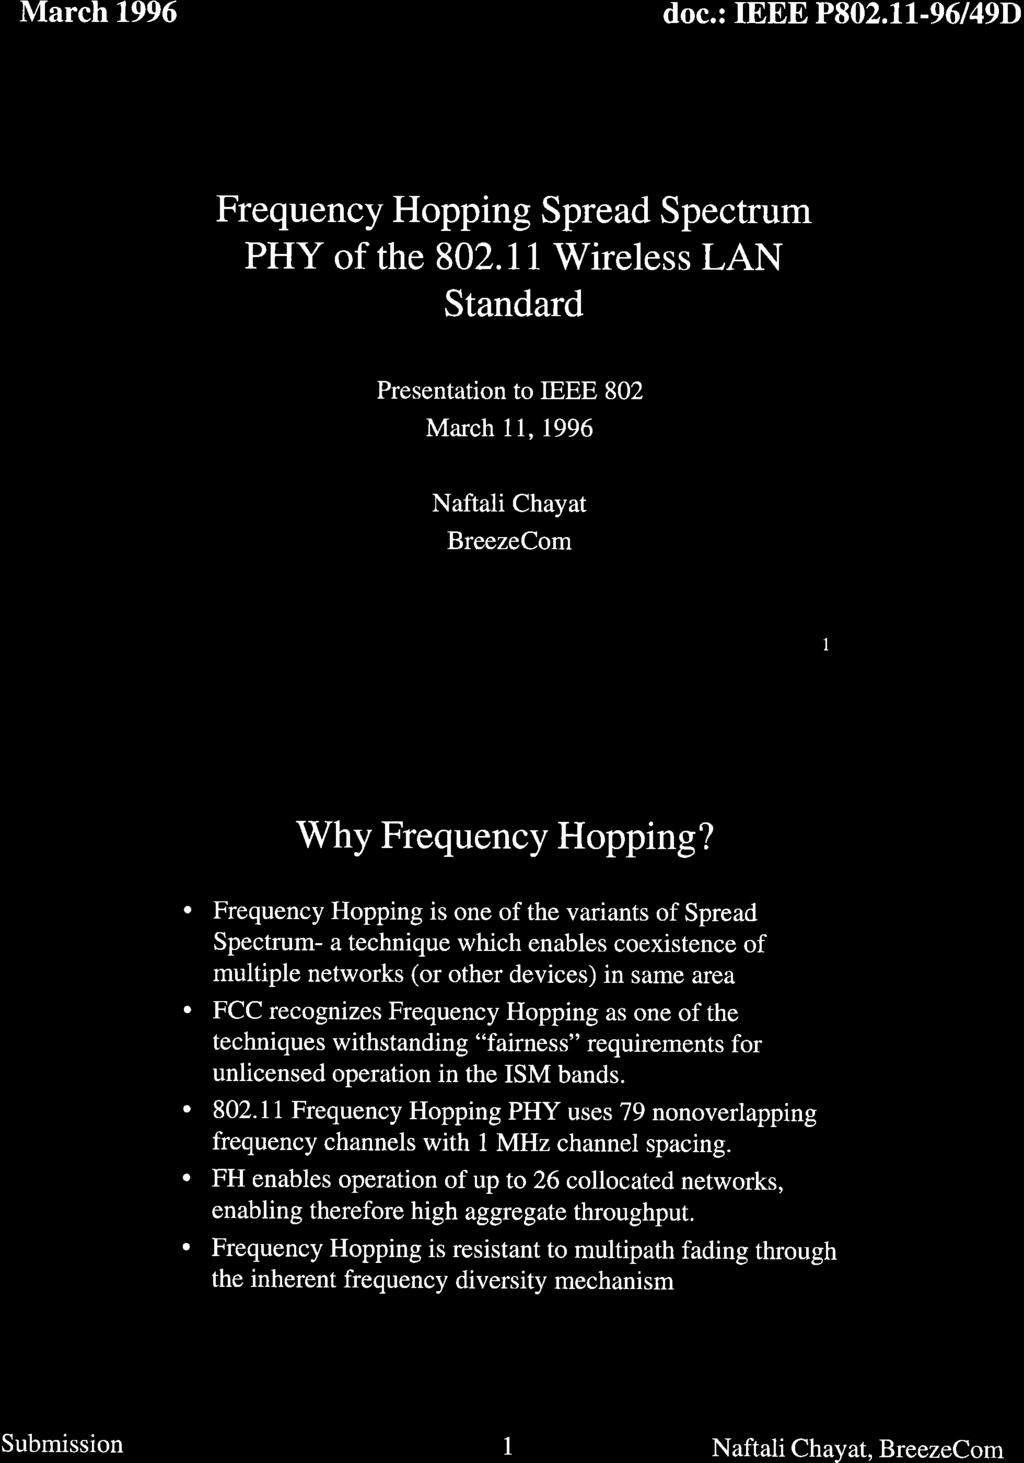 Frequency Hopping Spread Spectrum PHY of the 802.11 Wireless LAN Standard Presentation to IEEE 802 March 11, 1996 Naftali Chayat BreezeCom Copyright 1996 IEEE, All rights reserved.